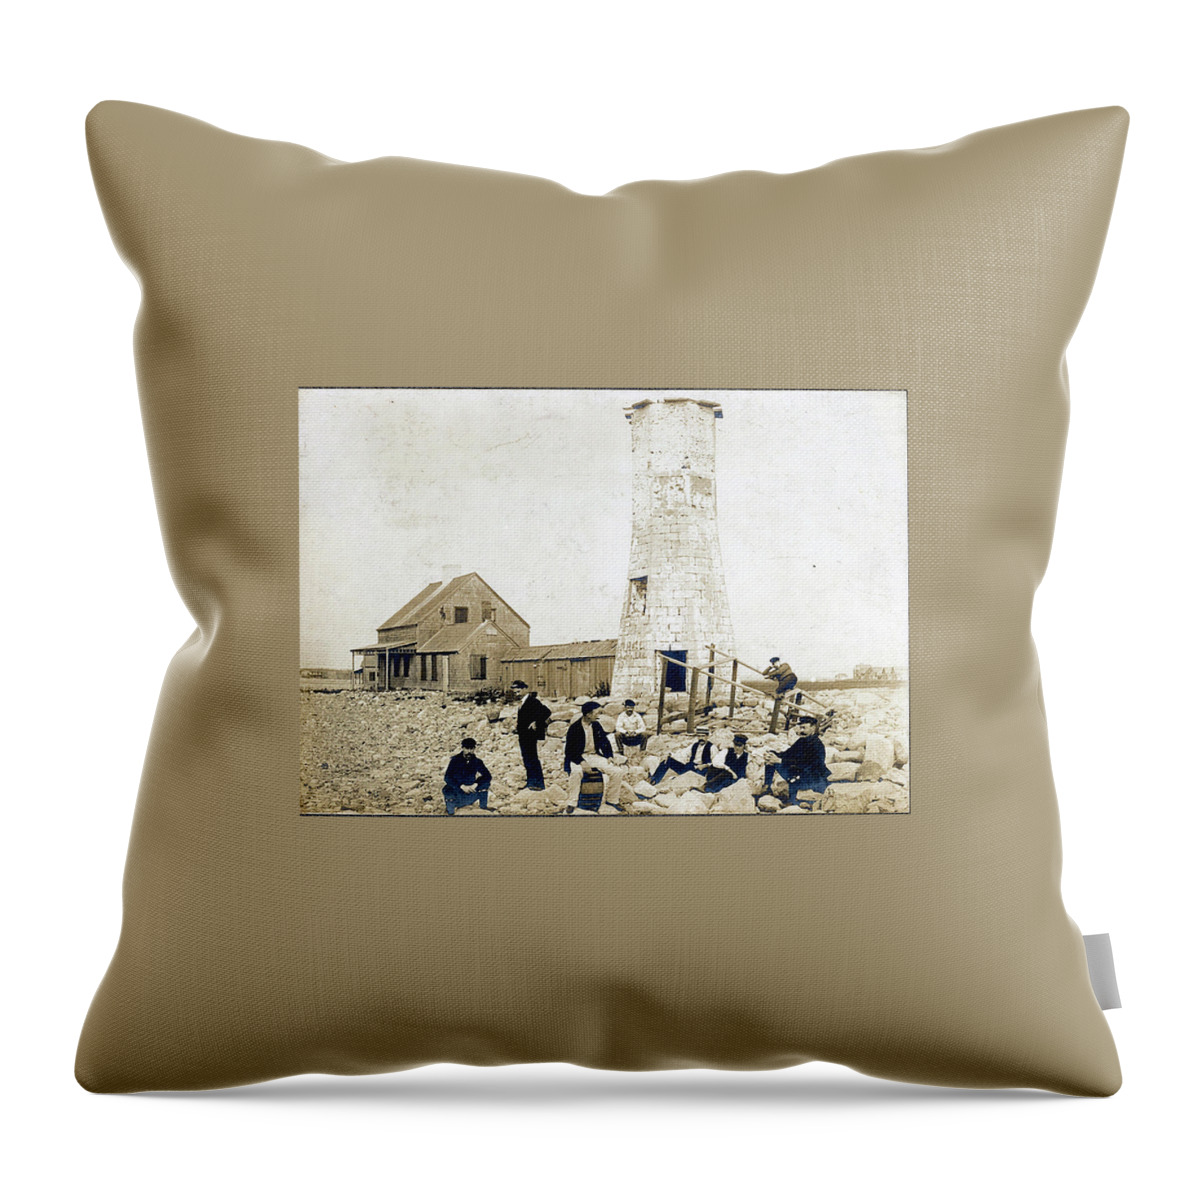  Throw Pillow featuring the digital art 20 by Cindy Greenstein